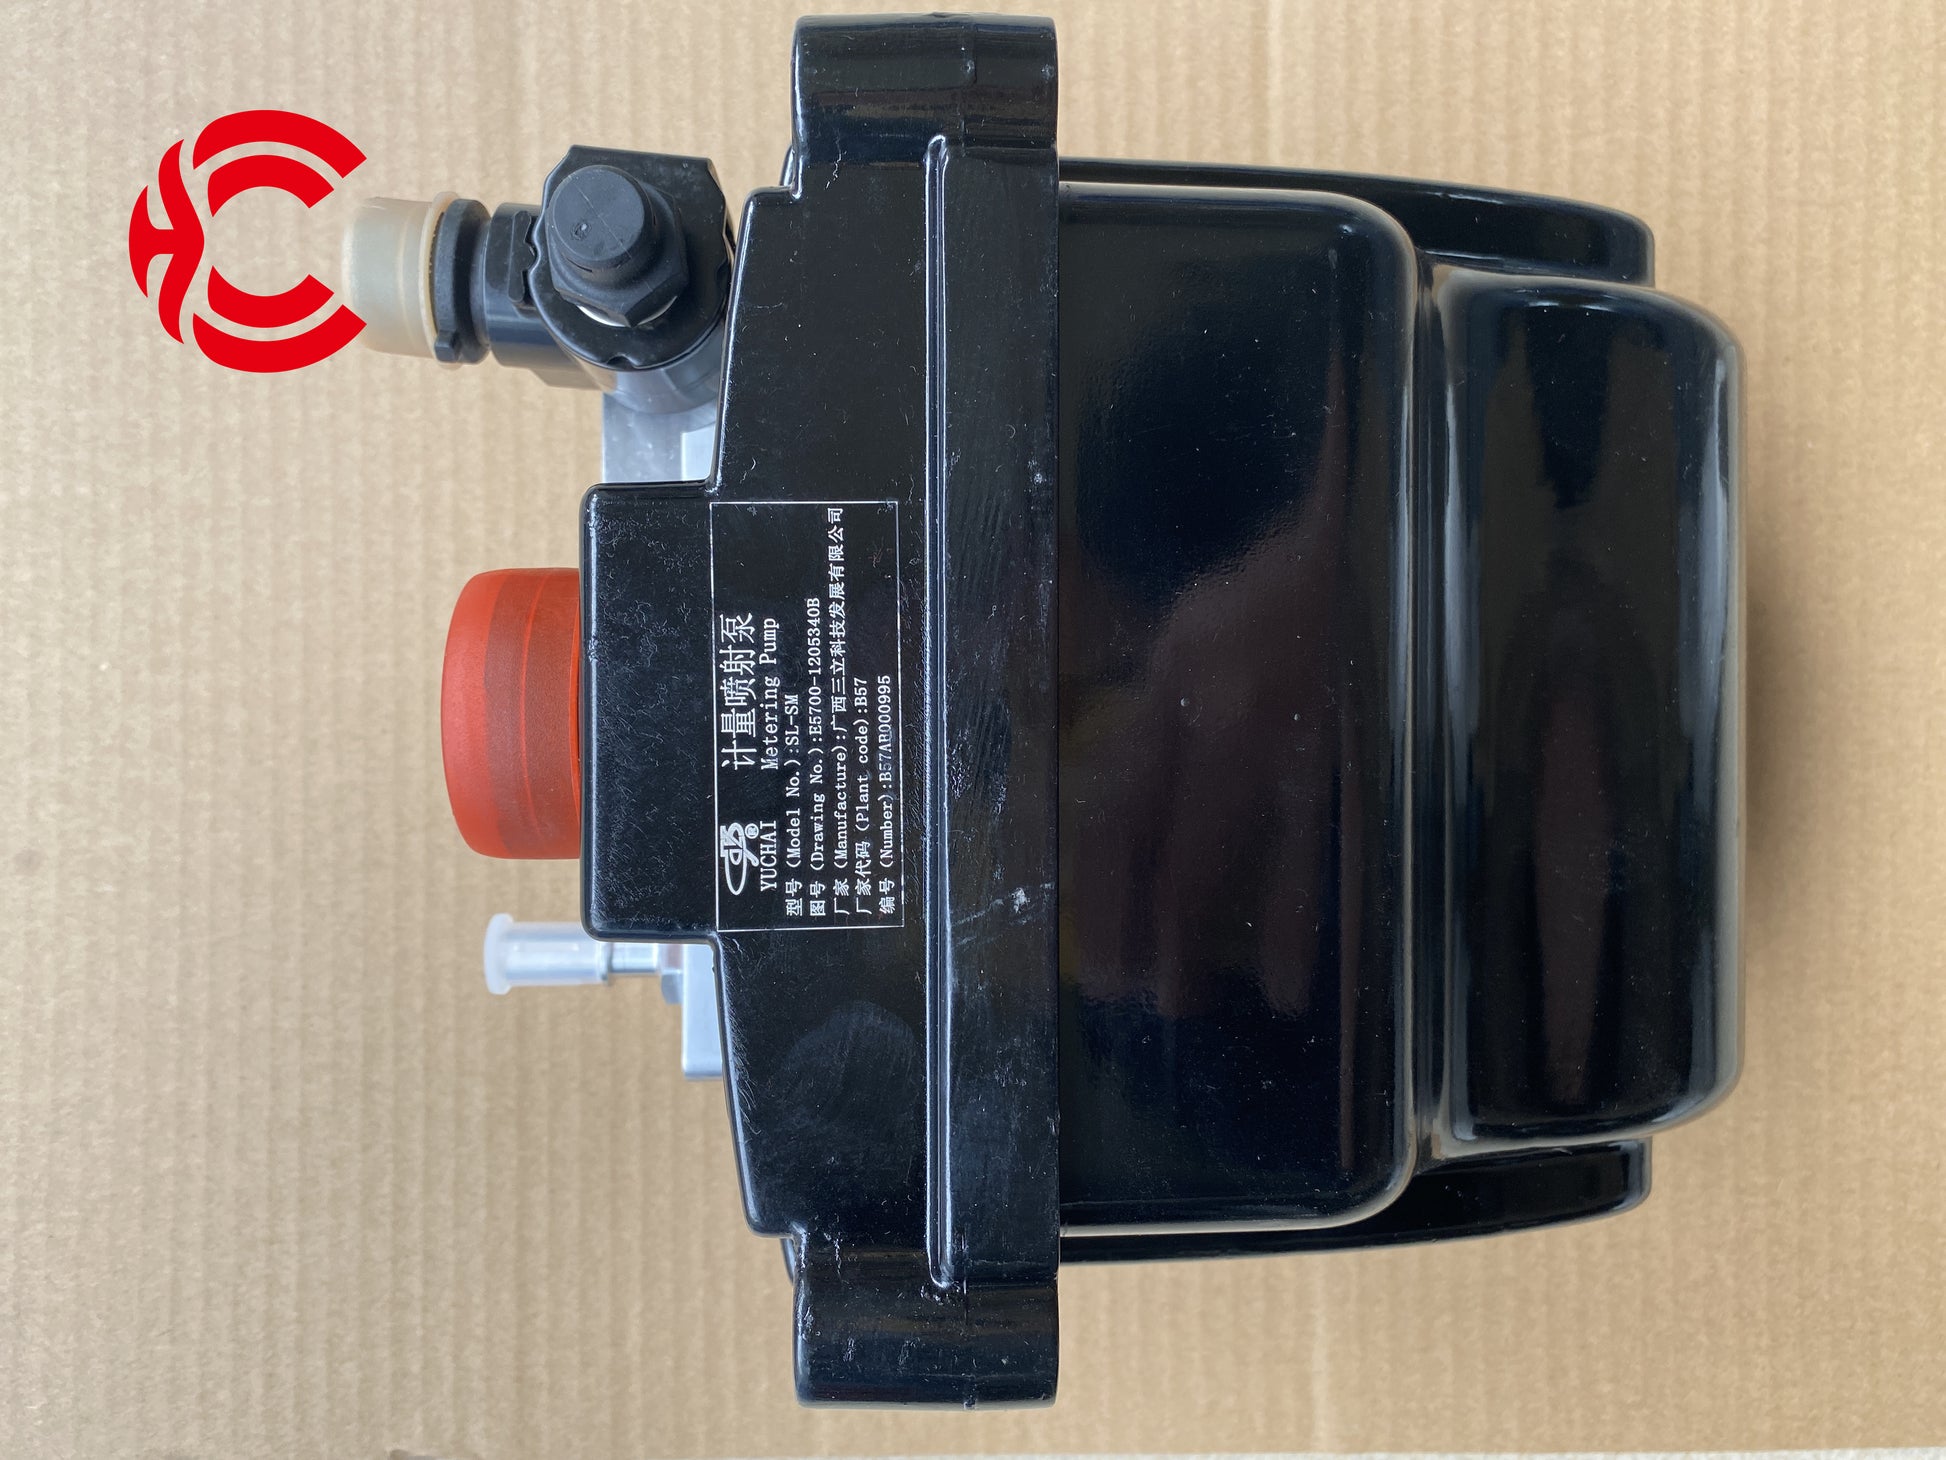 OEM: E5700-1205340BMaterial: ABS metalColor: black silverOrigin: Made in ChinaWeight: 1000gPacking List: 1* Adblue Pump More ServiceWe can provide OEM Manufacturing serviceWe can Be your one-step solution for Auto PartsWe can provide technical scheme for you Feel Free to Contact Us, We will get back to you as soon as possible.